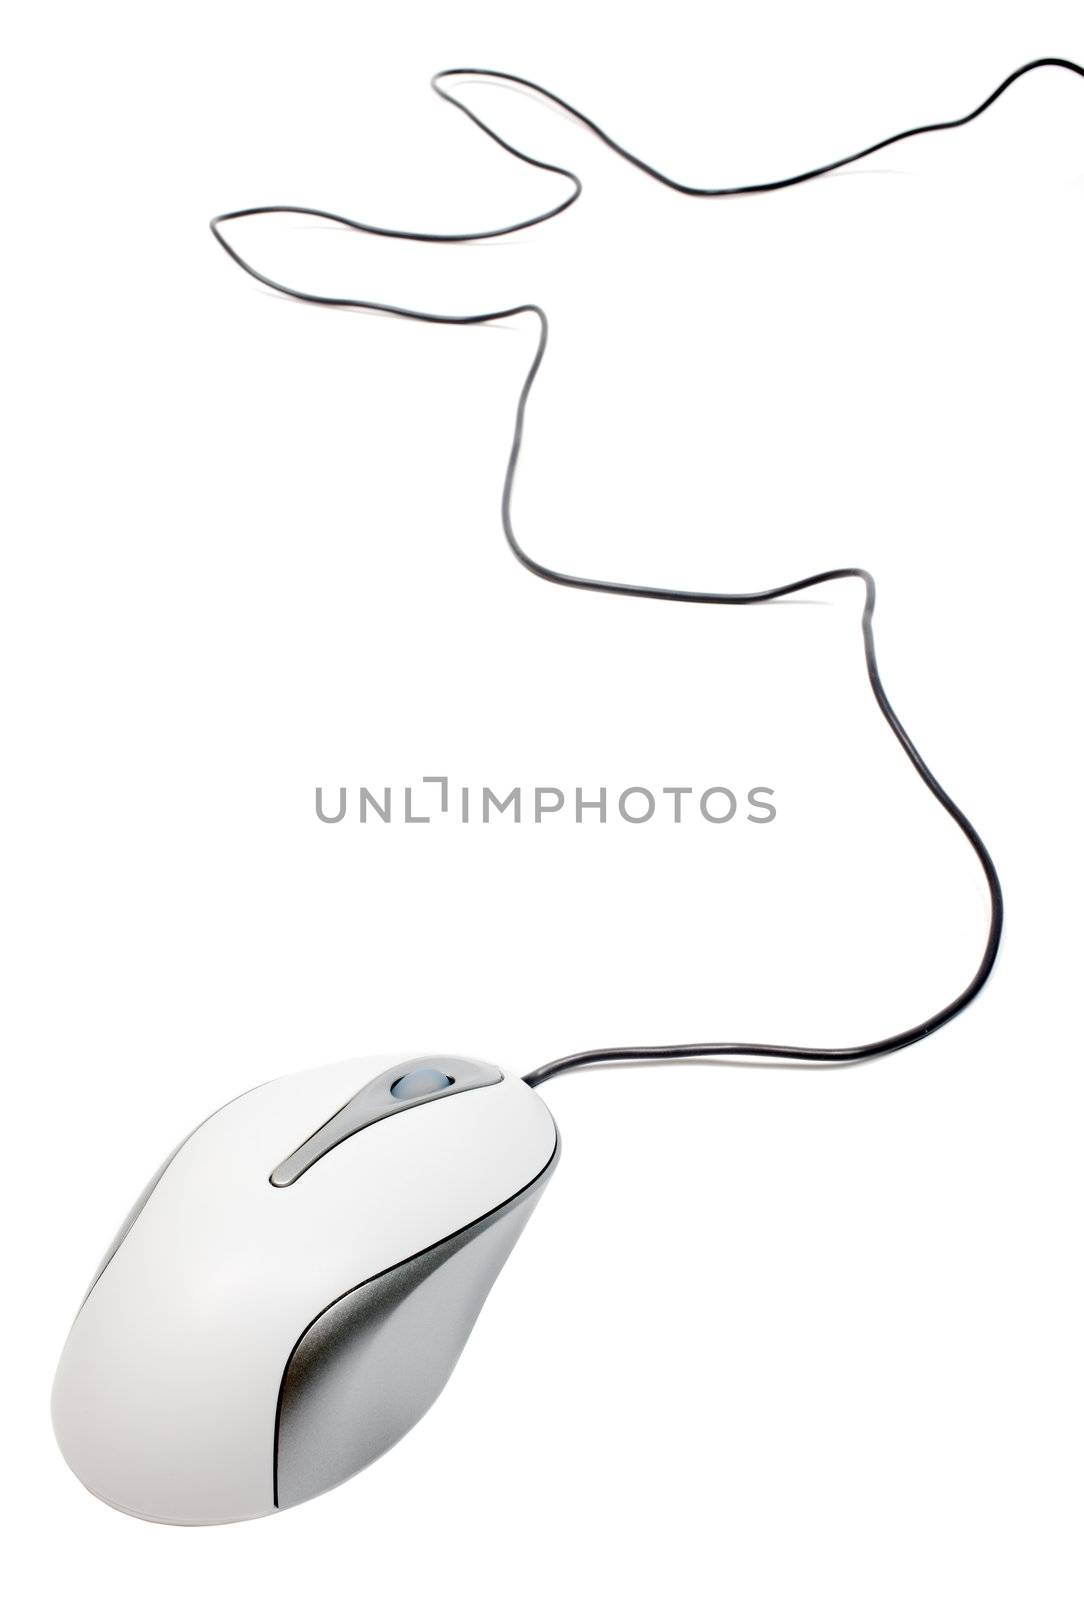 White computer mouse with wire isolated on white background.